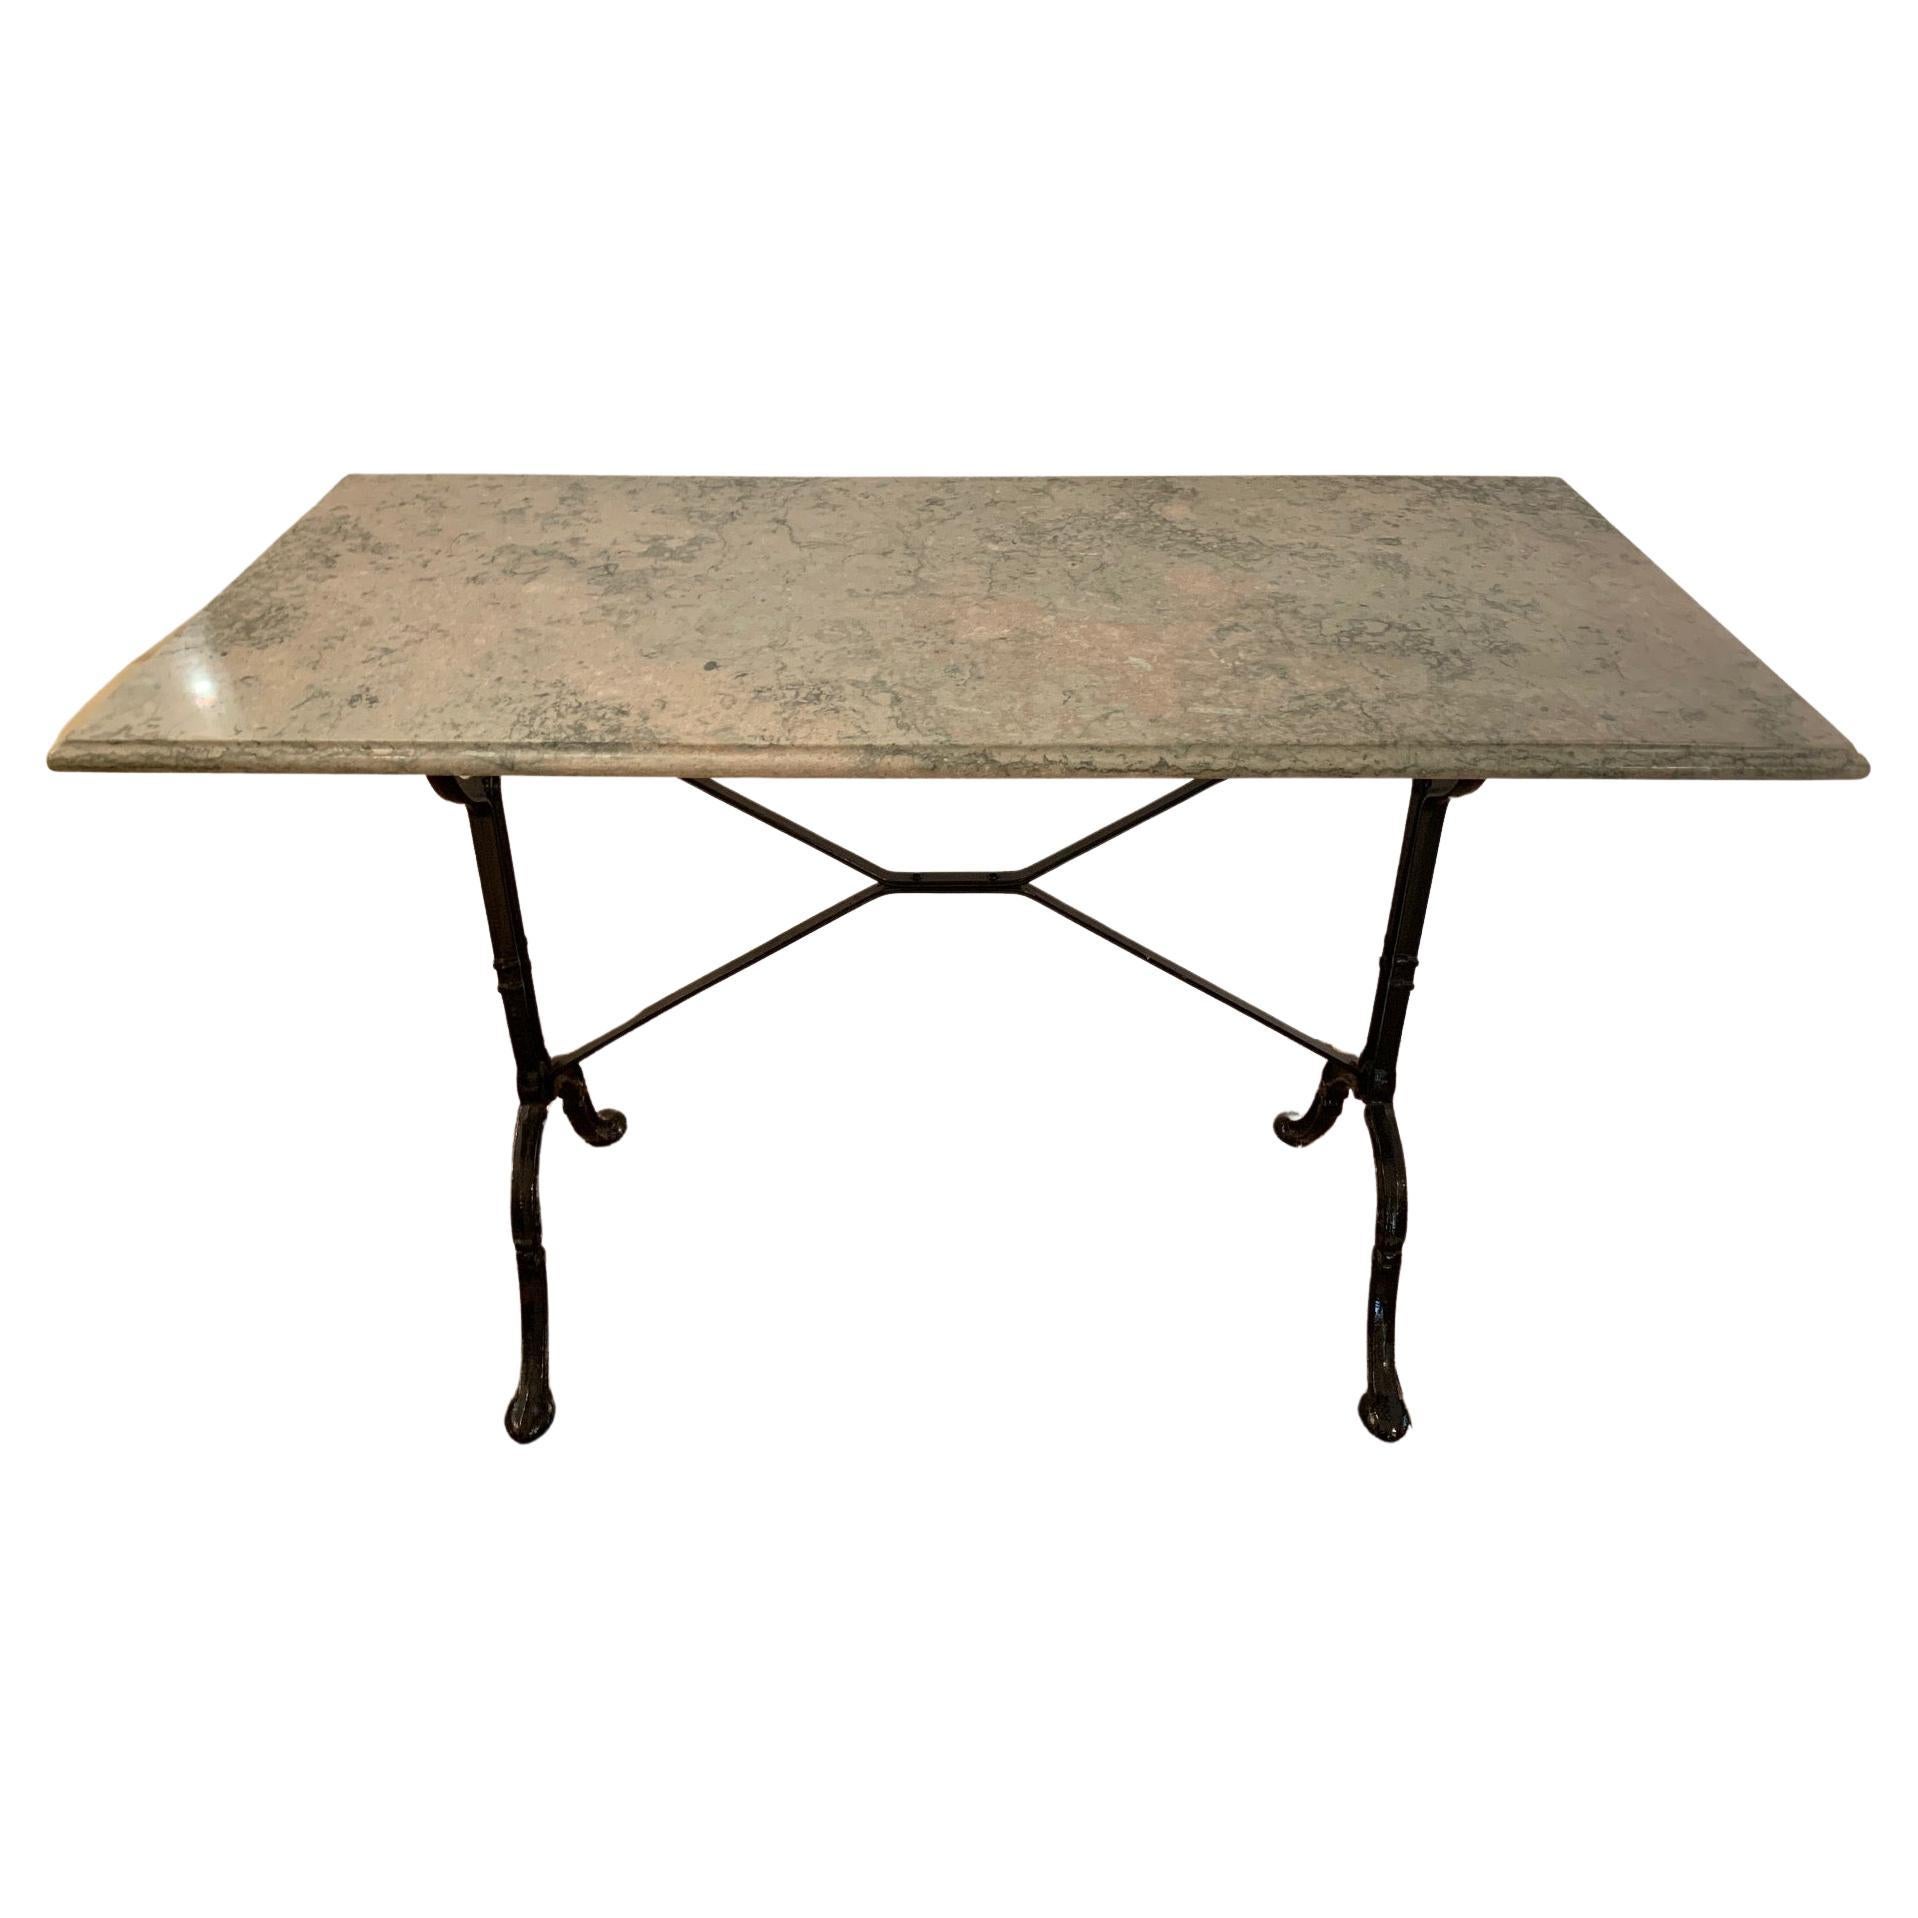 Lovely French Marble Top Cafe Table with Iron Base